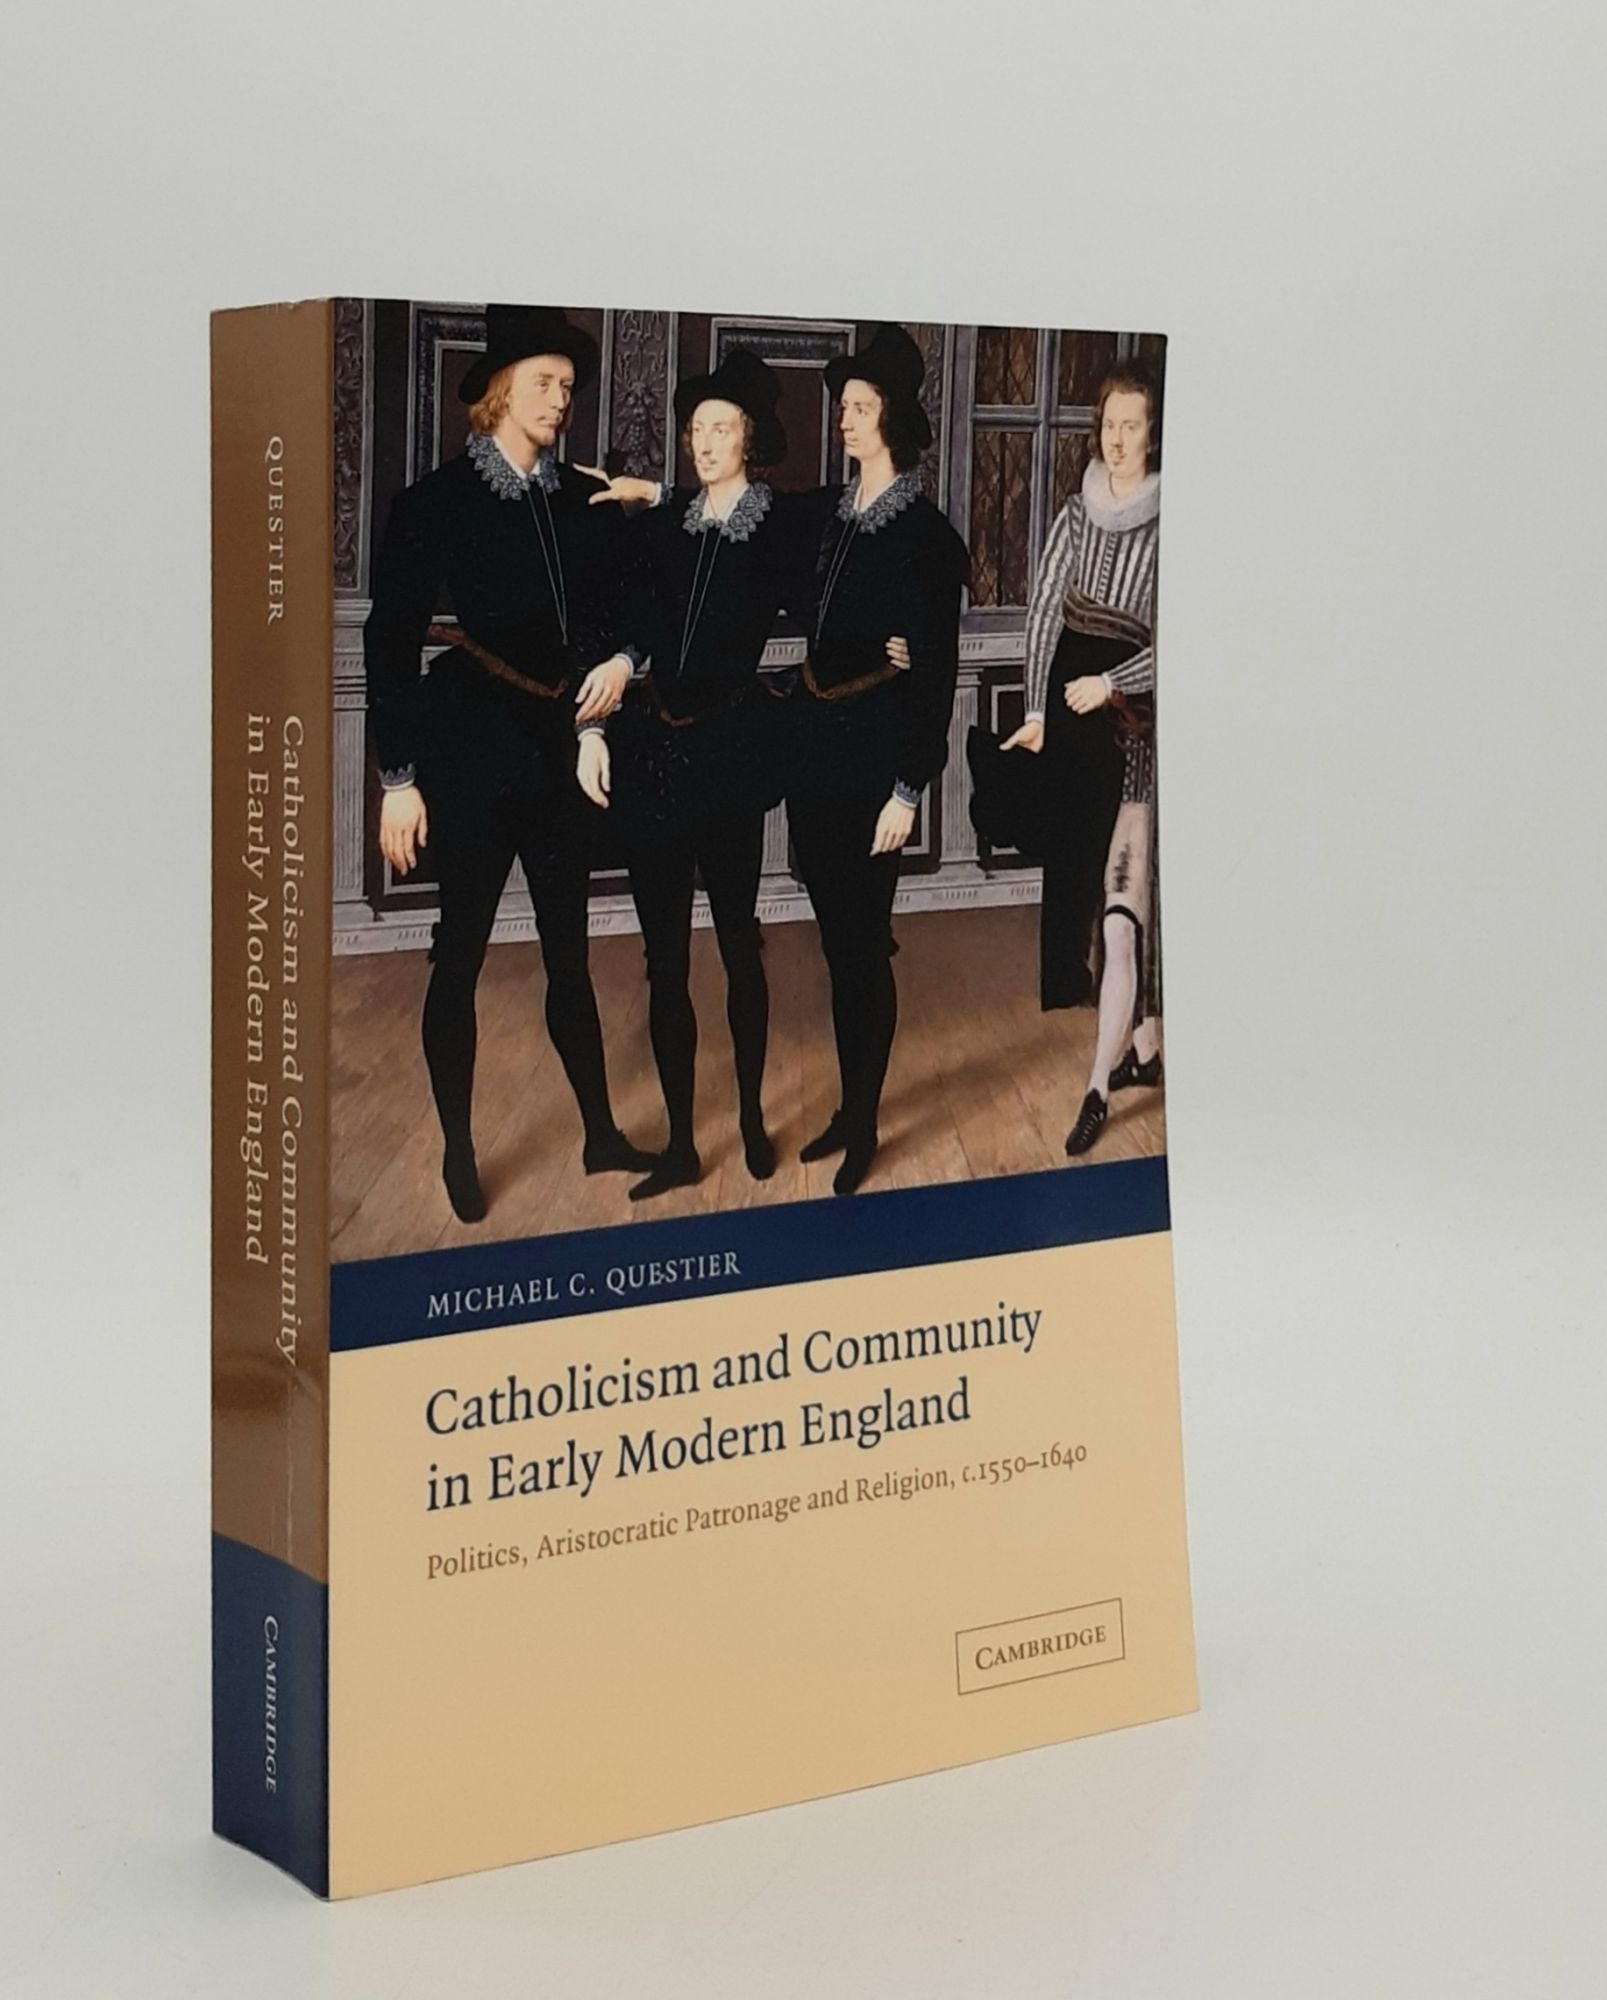 QUESTIER Michael C. - Catholicism and Community in Early Modern England Politics Aristocratic Patronage and Religion C. 1550-1640